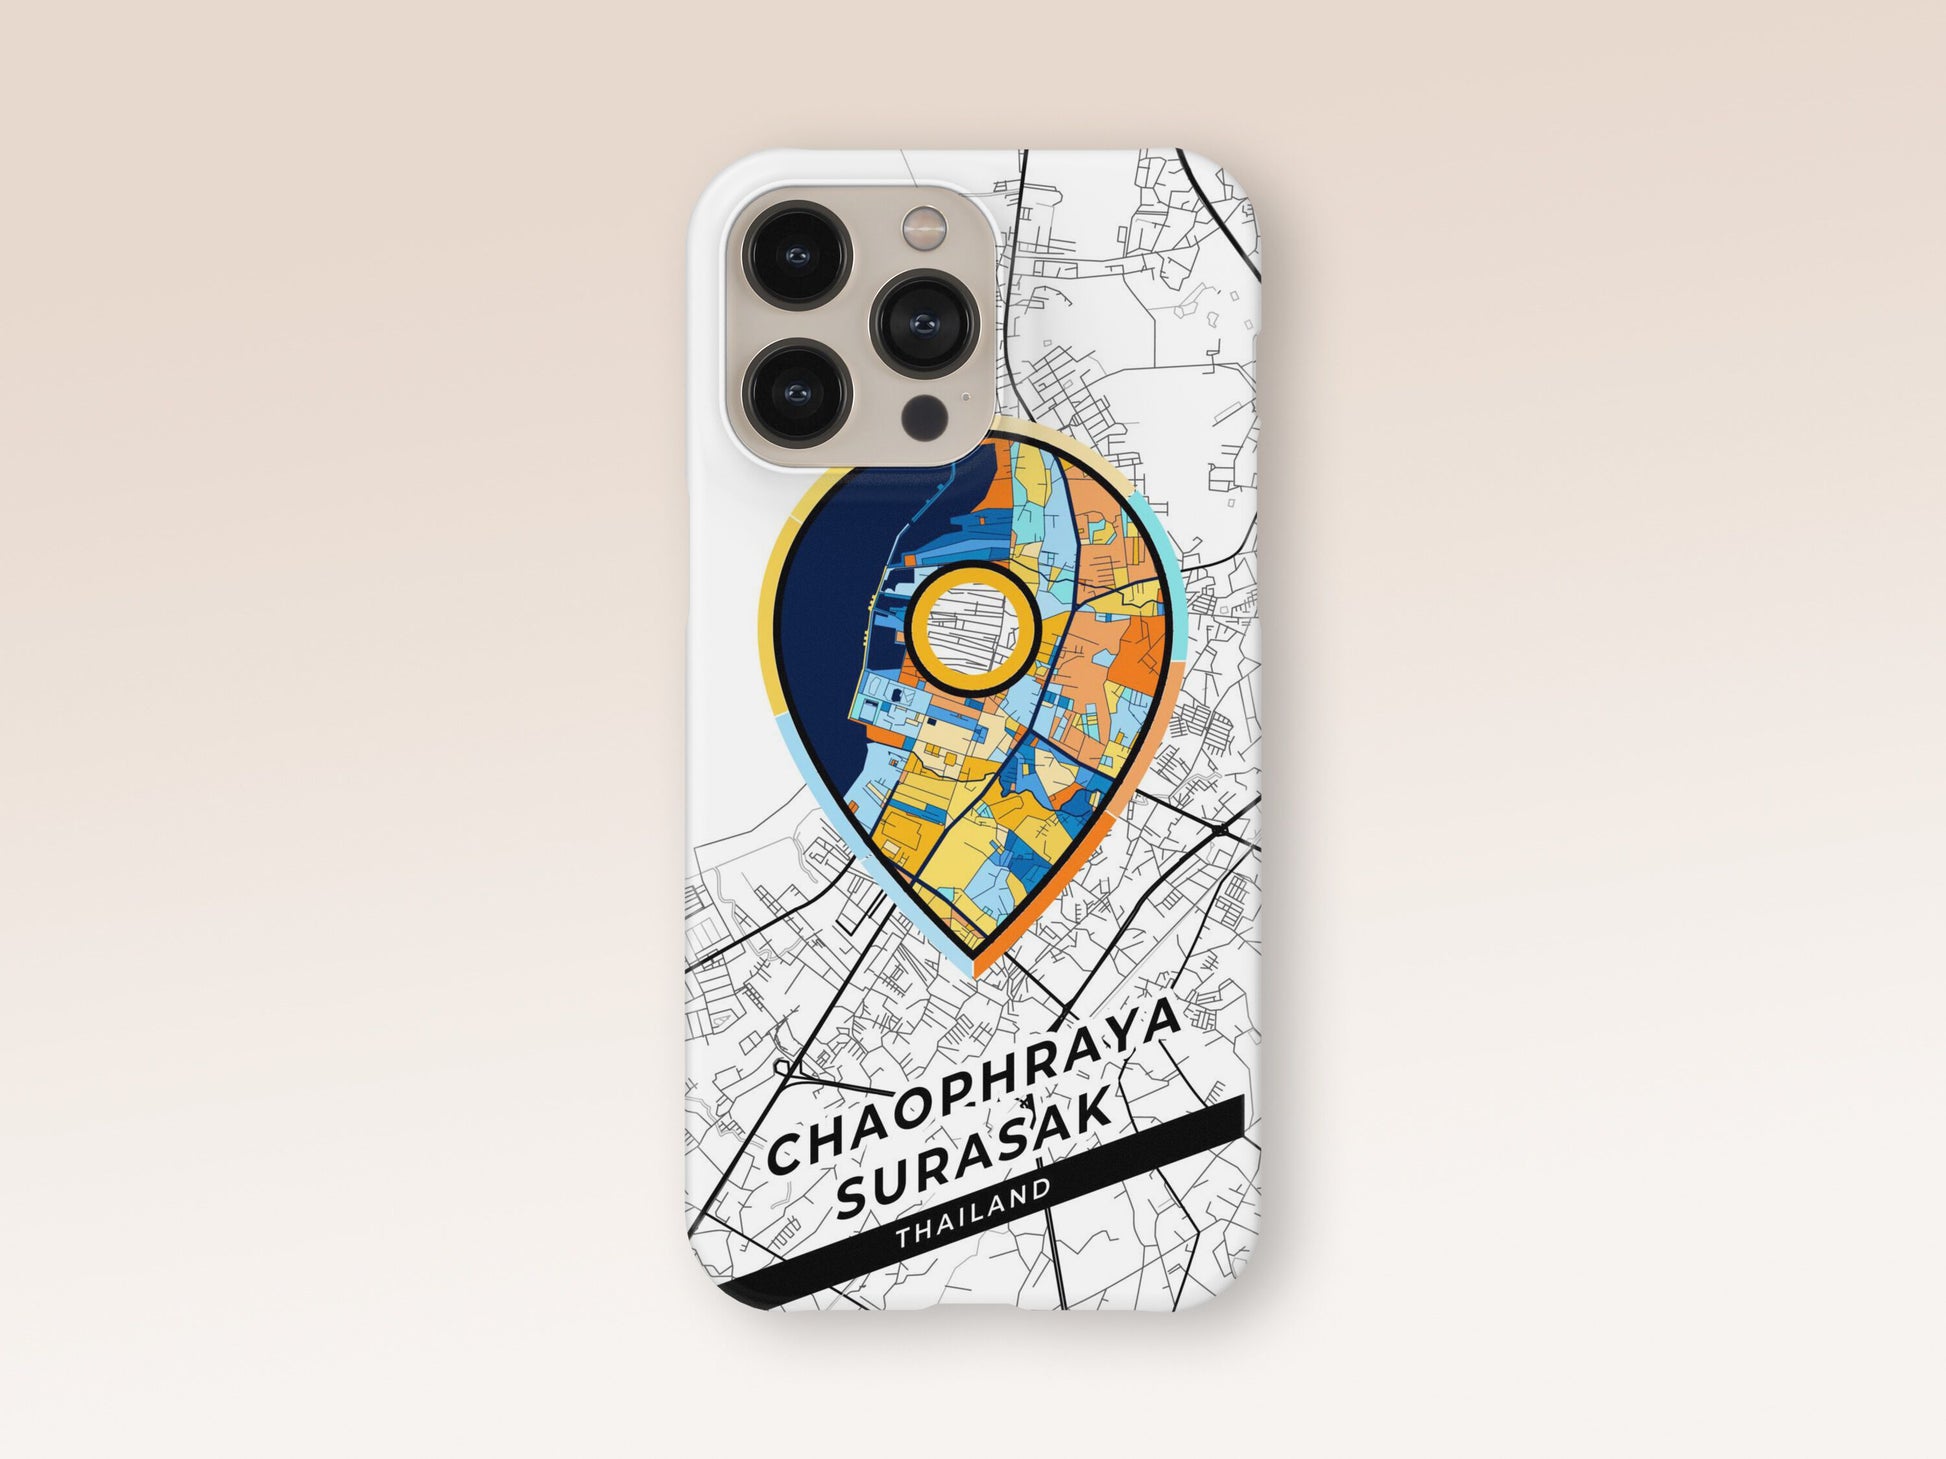 Chaophraya Surasak Thailand slim phone case with colorful icon. Birthday, wedding or housewarming gift. Couple match cases. 1